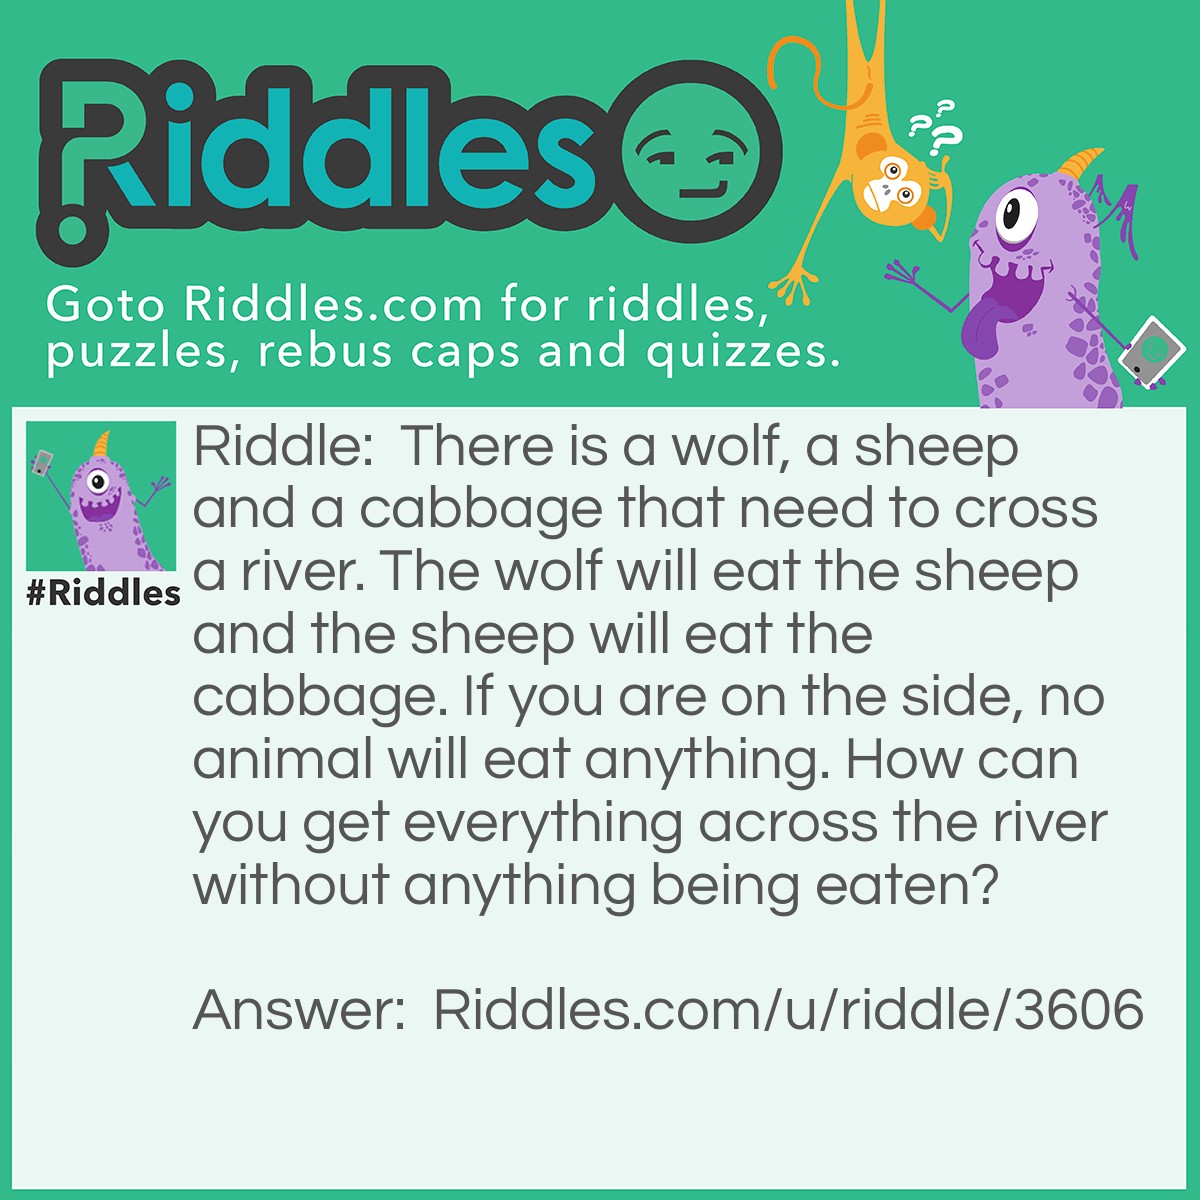 Riddle: There is a wolf, a sheep and a cabbage that need to cross a river. The wolf will eat the sheep and the sheep will eat the cabbage. If you are on the side, no animal will eat anything. How can you get everything across the river without anything being eaten? Answer: You firstly get the sheep across the river then the wolf. Take the sheep back to the other side and bring the cabbage. After this, take the sheep and BOOM, nothing can be eaten!